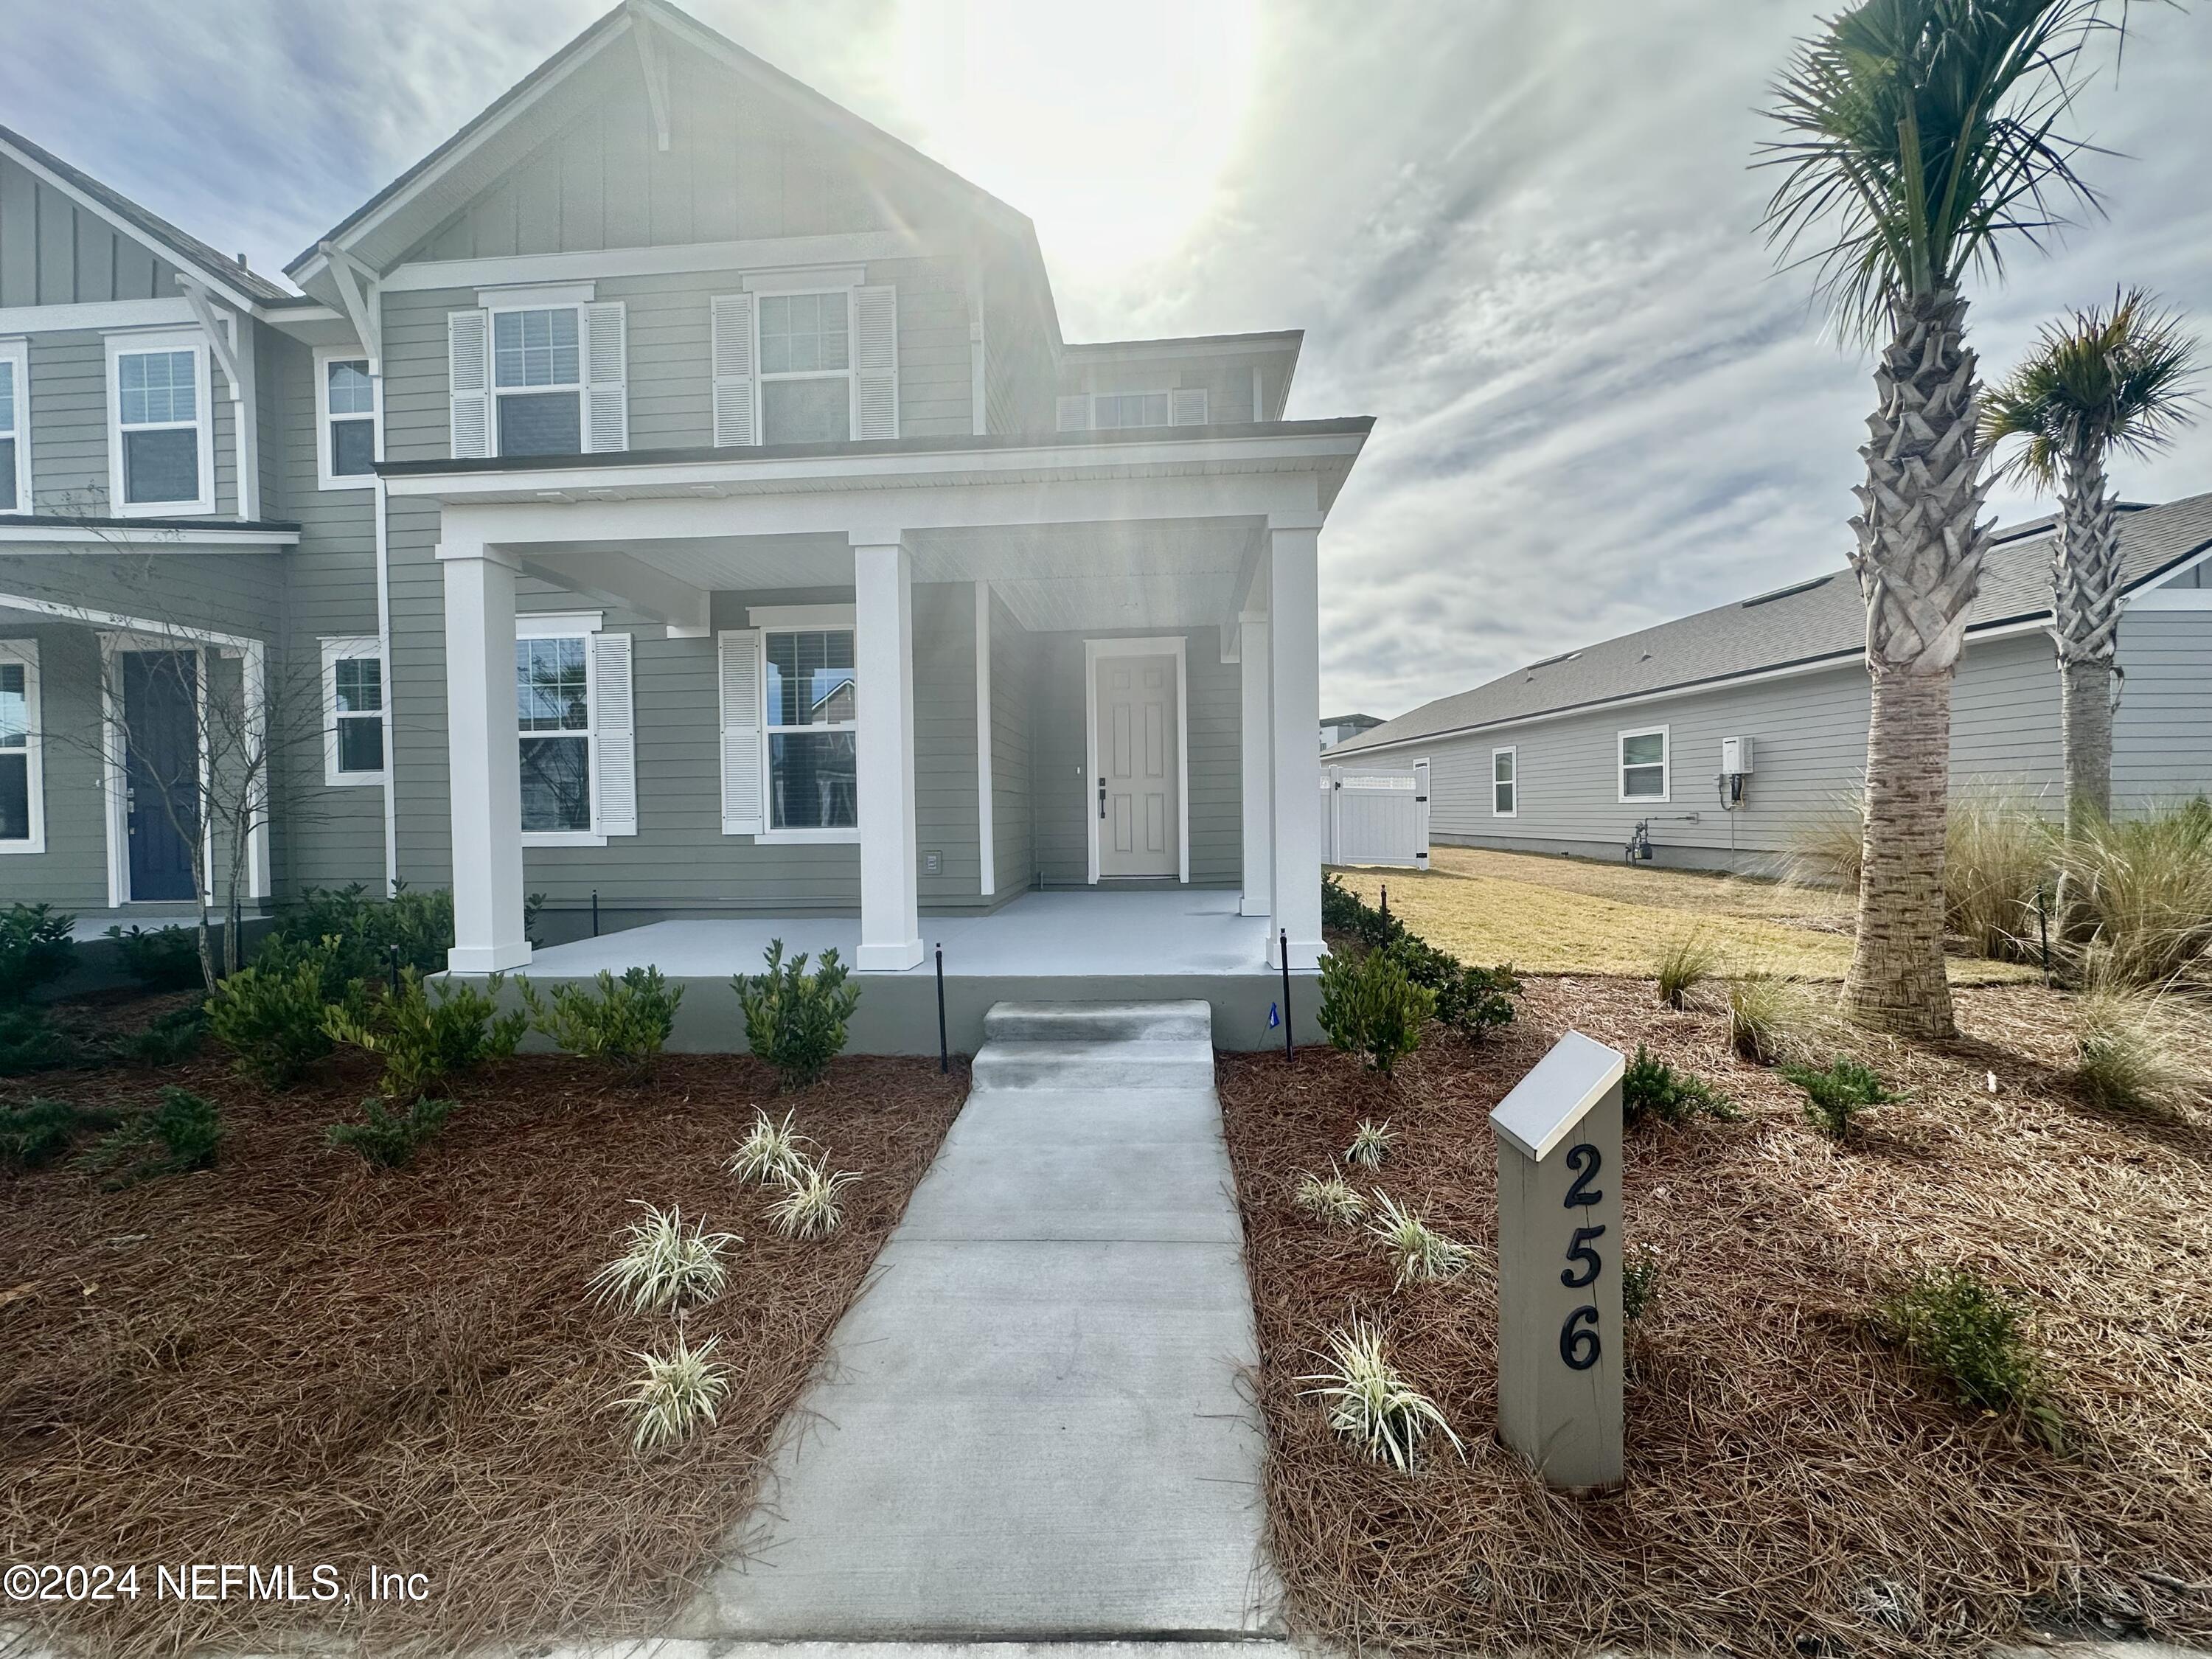 View Yulee, FL 32097 townhome